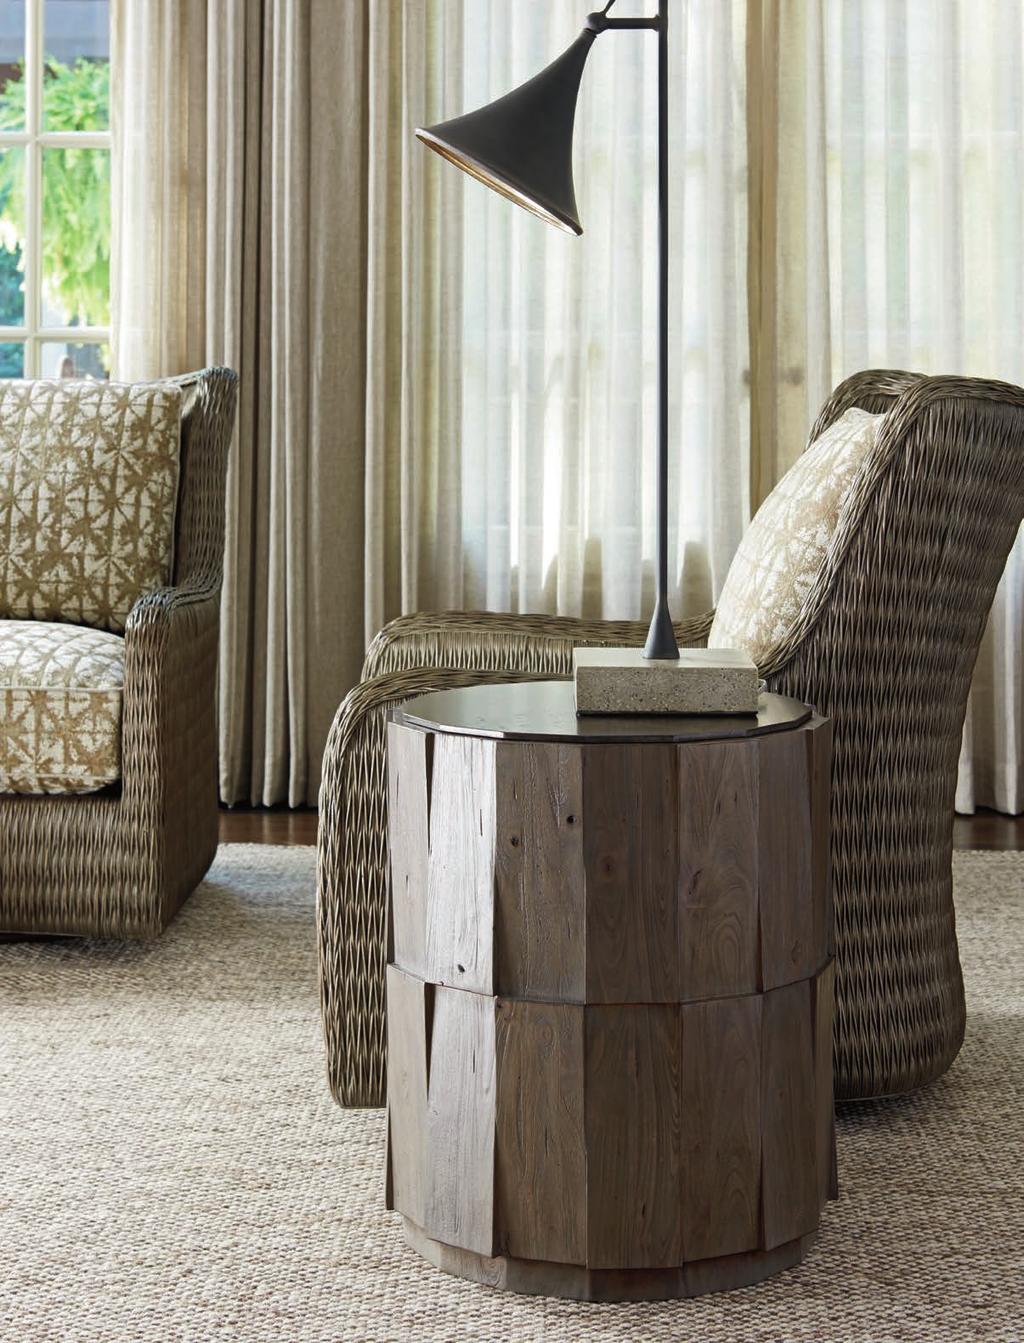 The Estero chair blends the casual sophistication of woven rattan with the exceptional